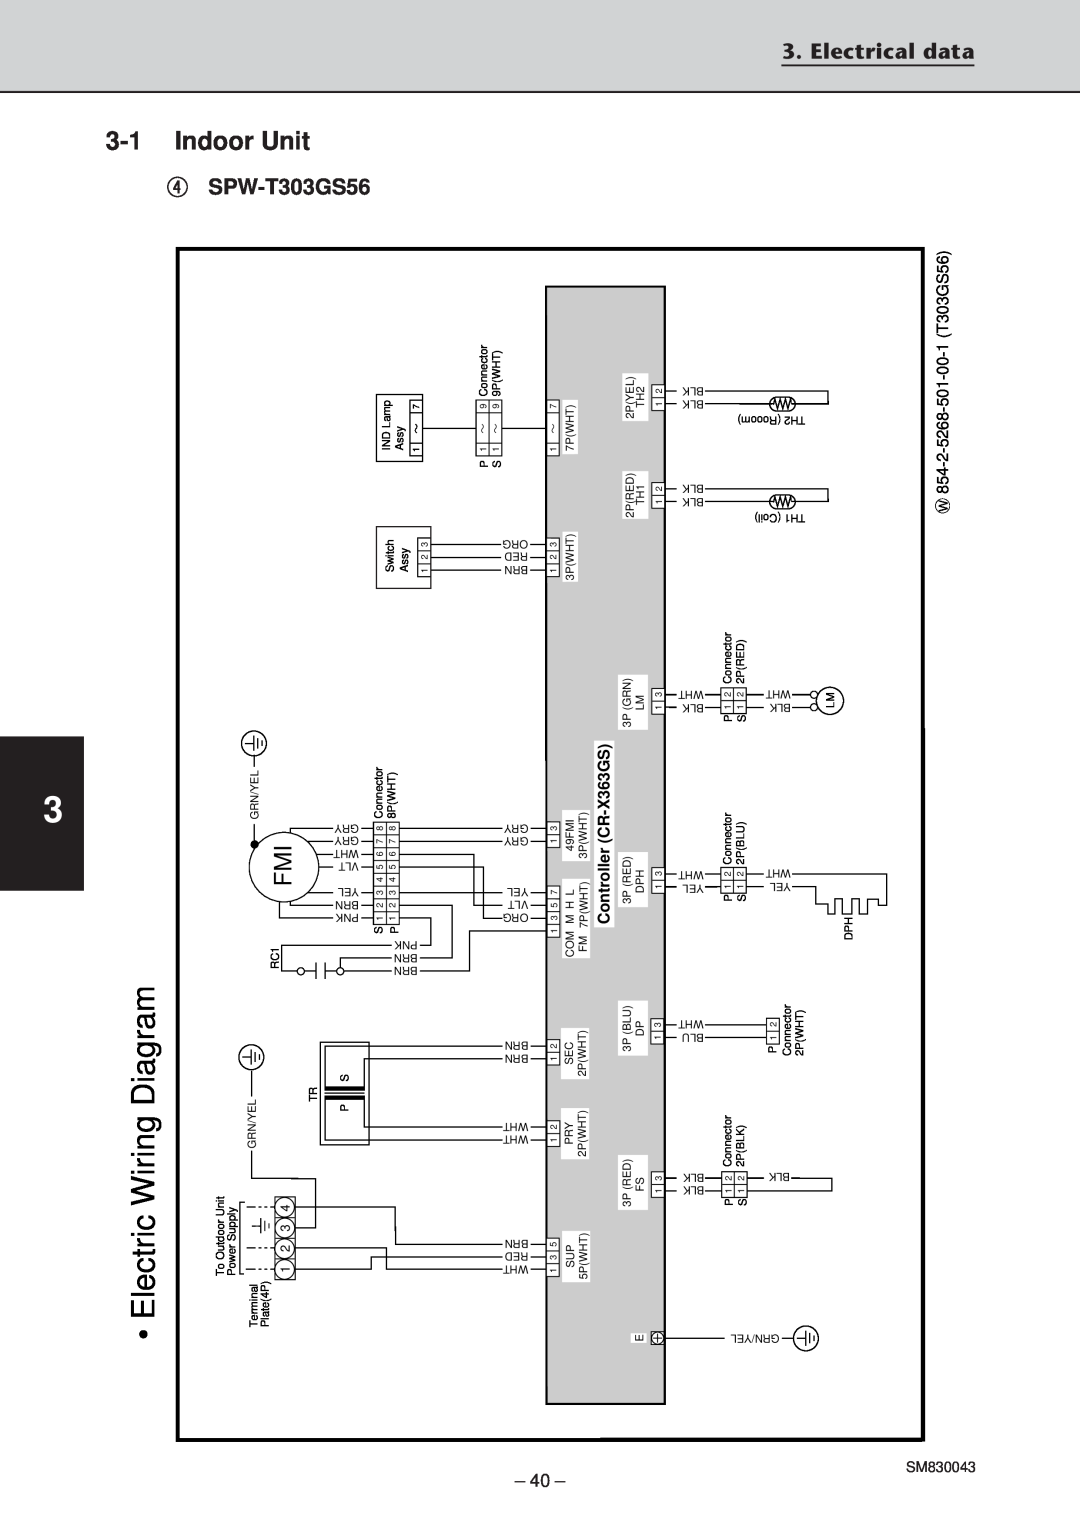 Sanyo SPW-T363G56, SPW-T363GS56, SPW-T483G56 Diagram, ElectricWiring, 3-1Indoor Unit, Electrical data, 4SPW-T303GS56 